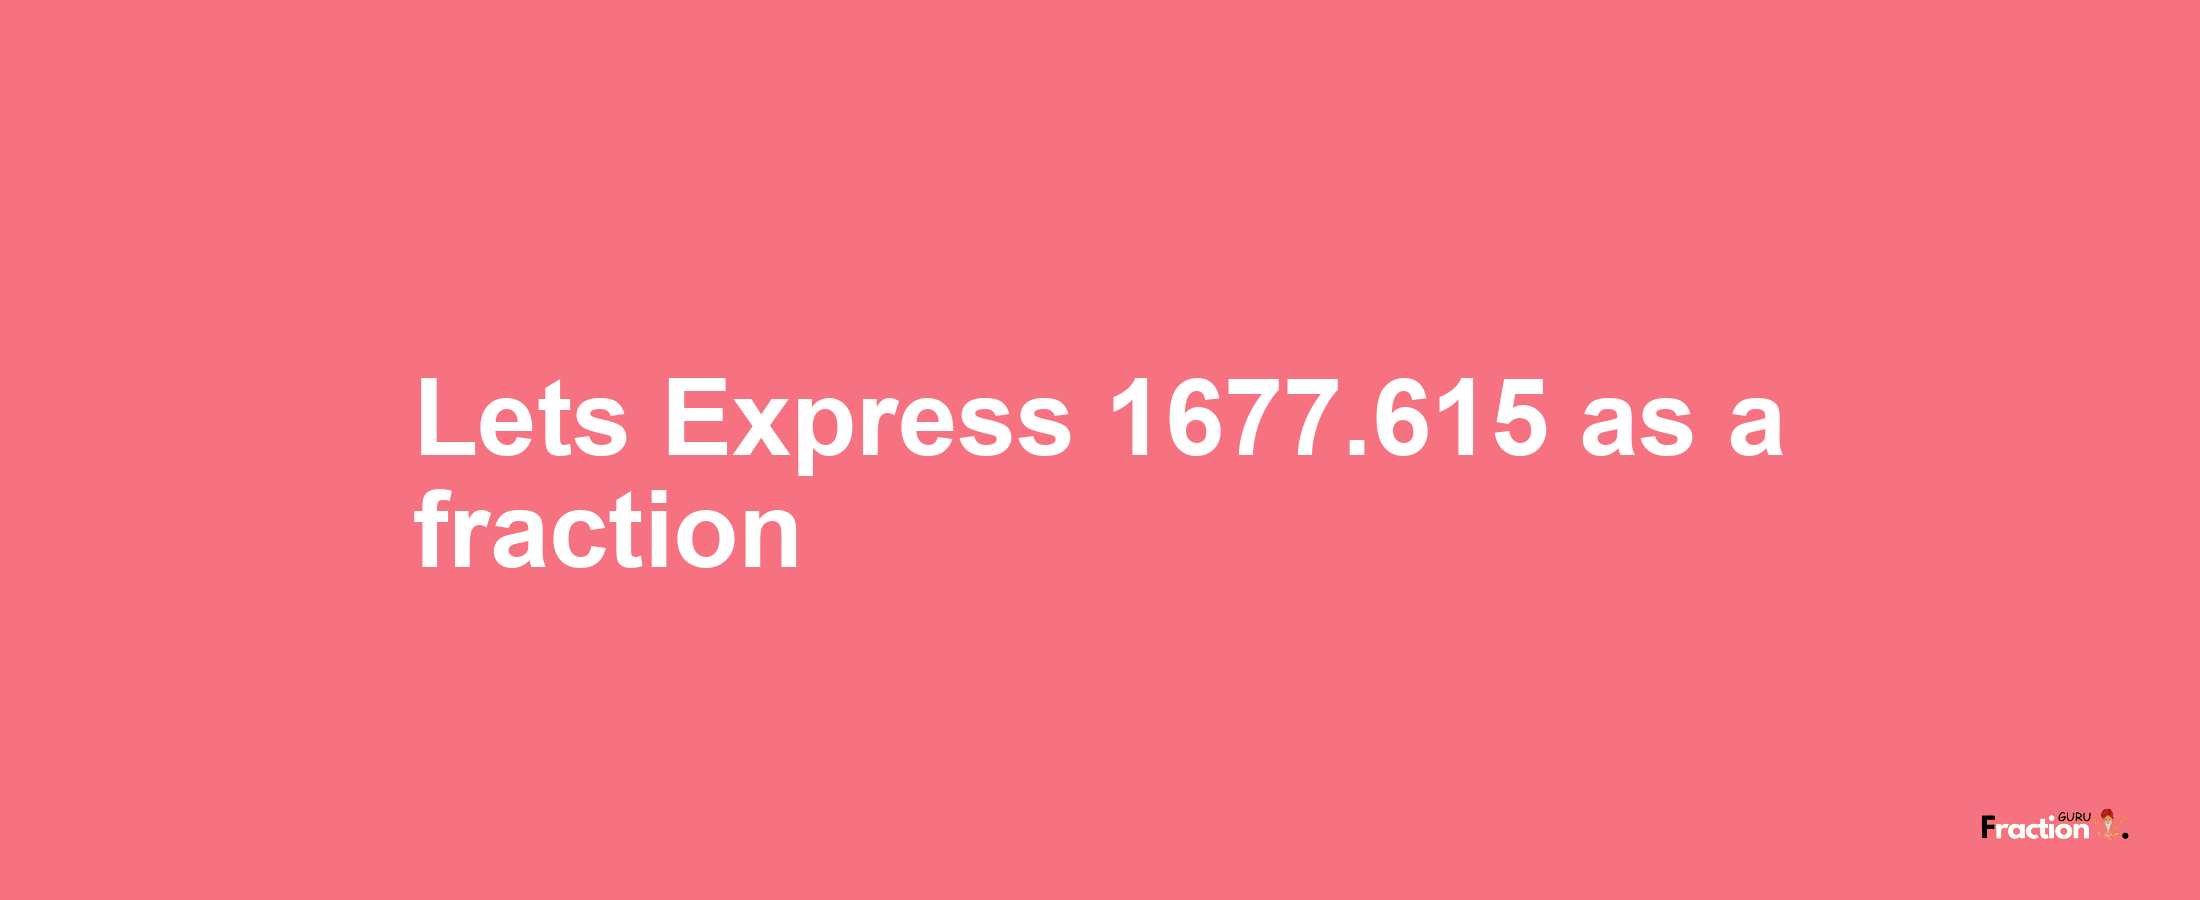 Lets Express 1677.615 as afraction